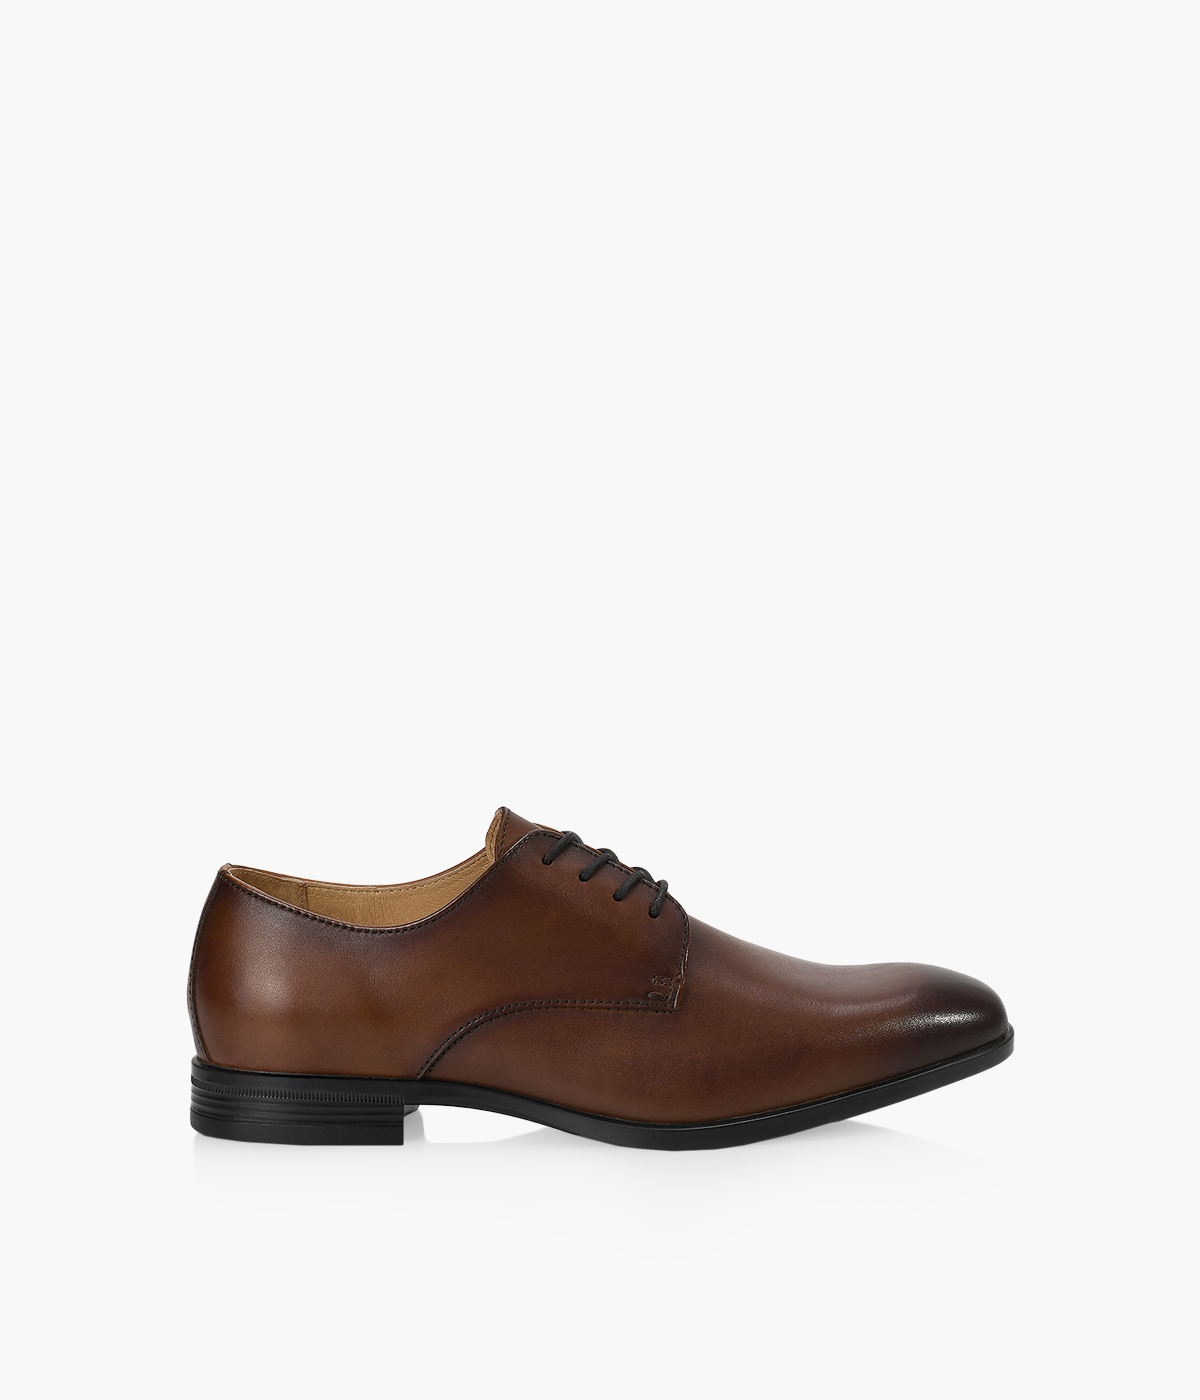 BROWNS GRIFFITH - Leather | Browns Shoes